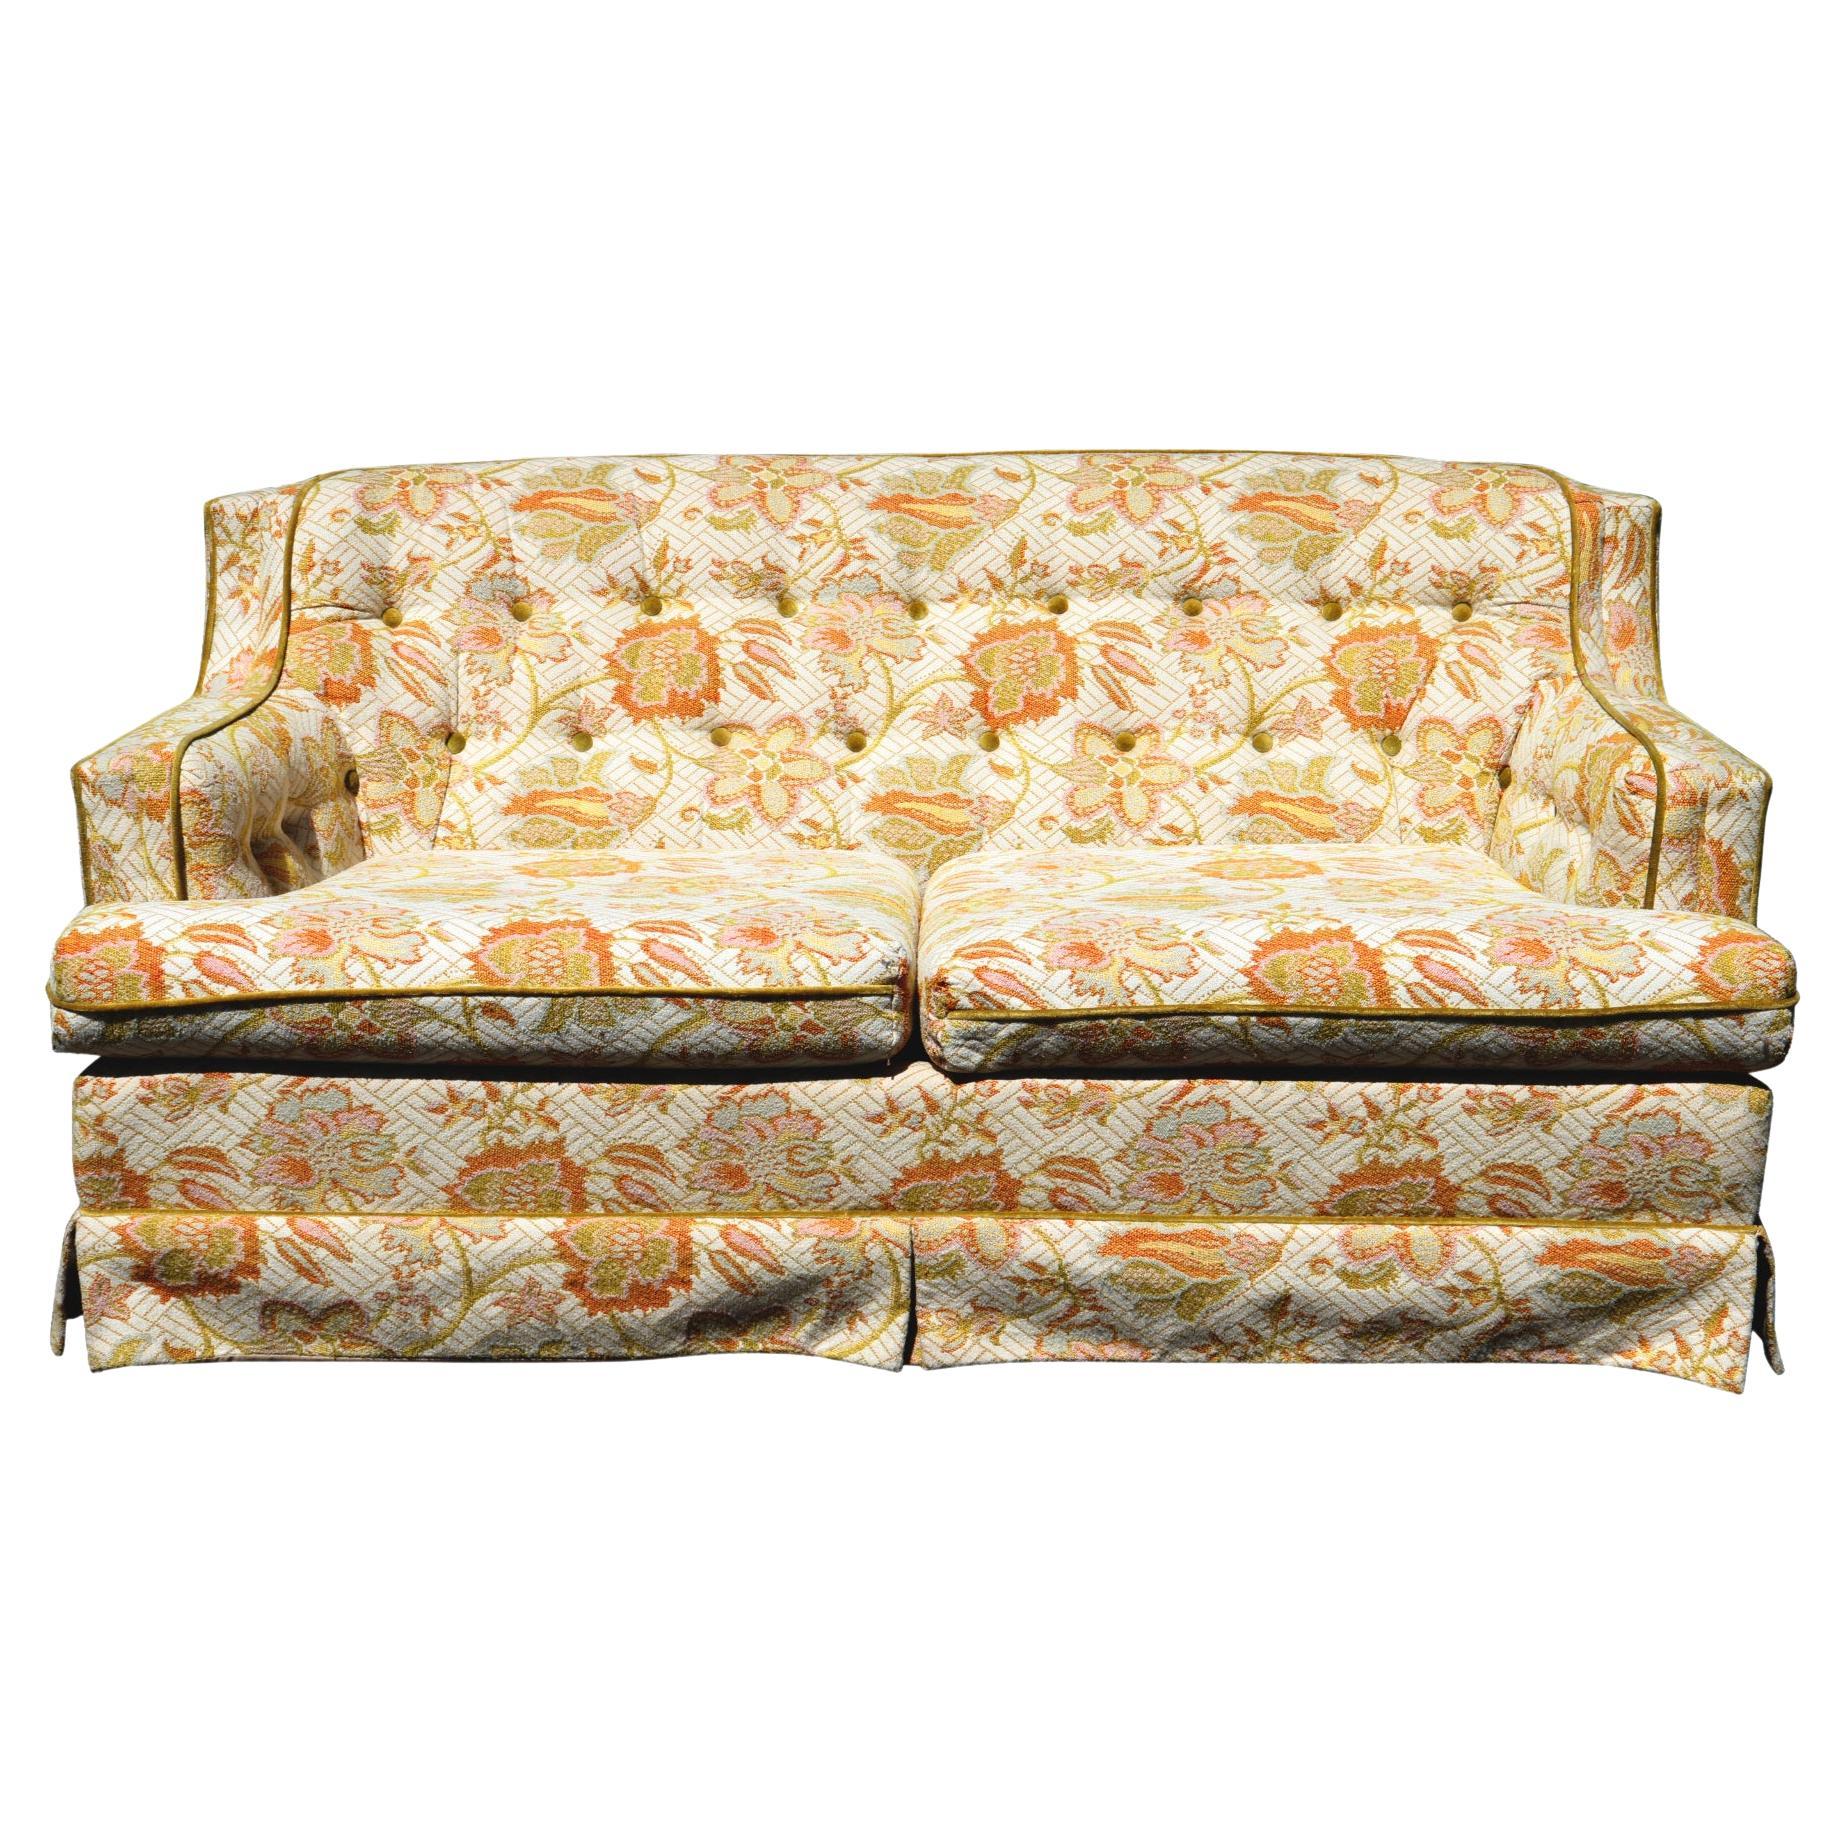 Midcentury Tufted Floral Loveseat Sofa For Sale